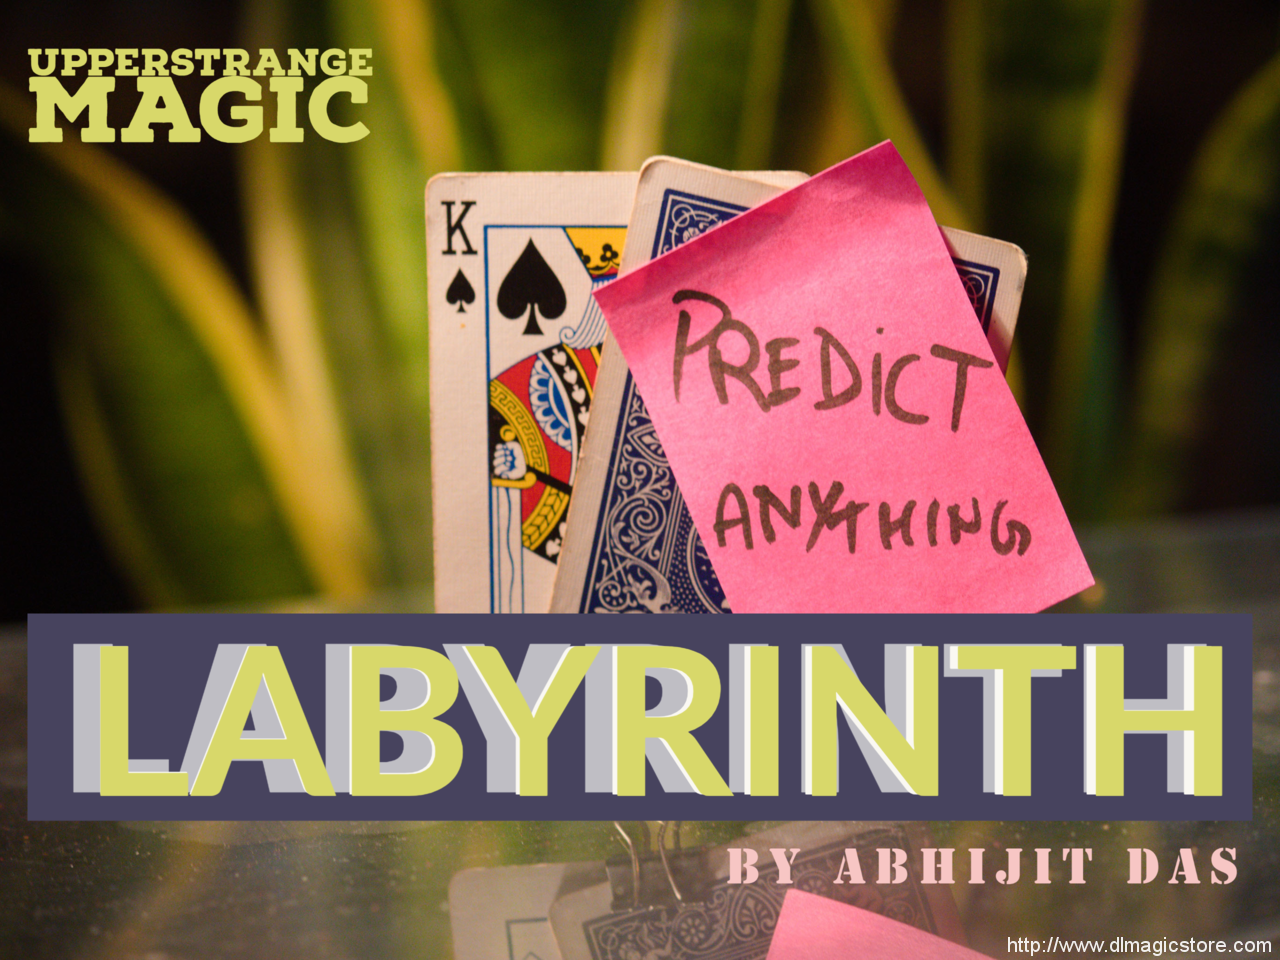 LABYRINTH by Abhijit Das (Instant Download)